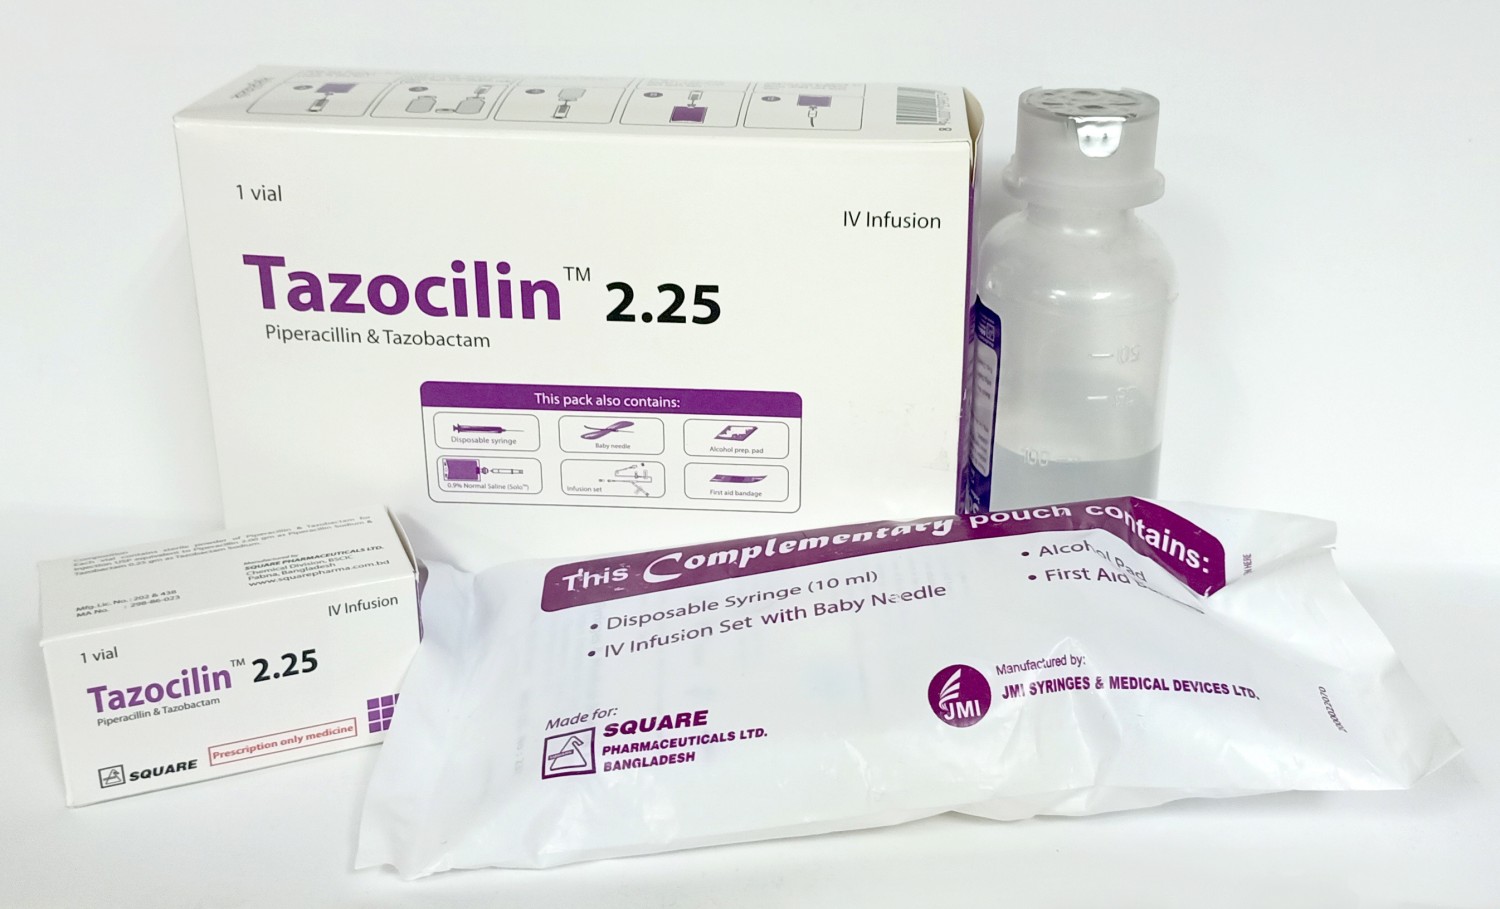 IV Infusion Tazocilin 4.5 gm (combipack)